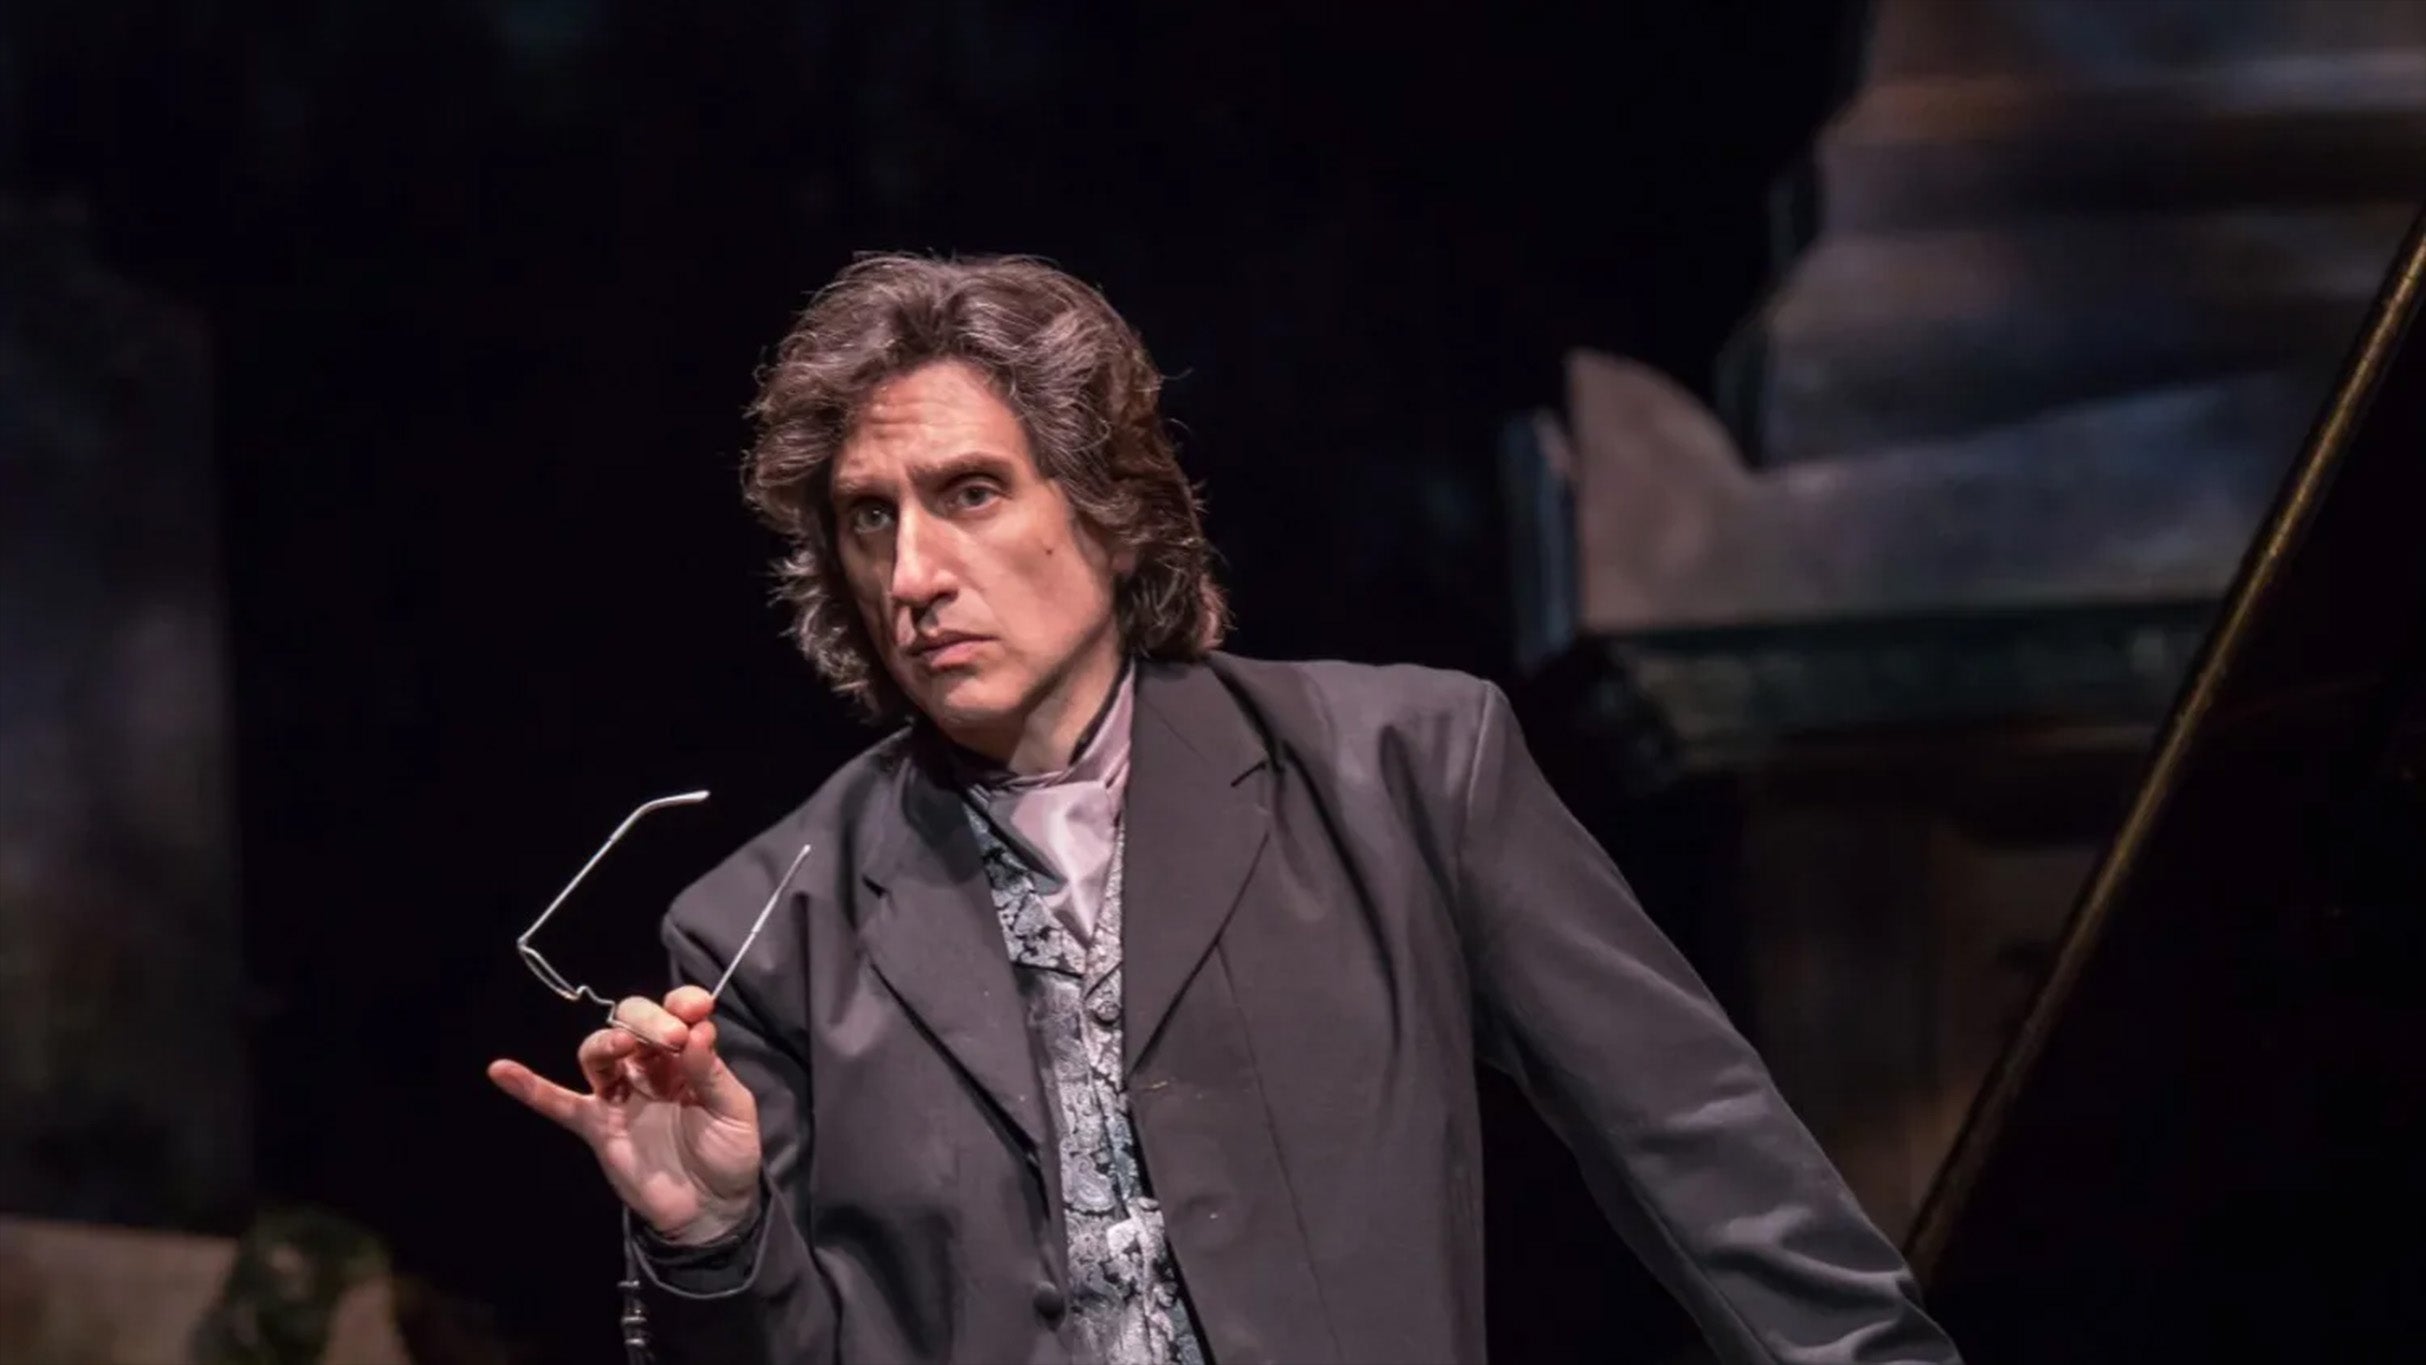 Balboa Theatre 100th - Featuring Hershey Felder in San Diego promo photo for SD Theatres presale offer code